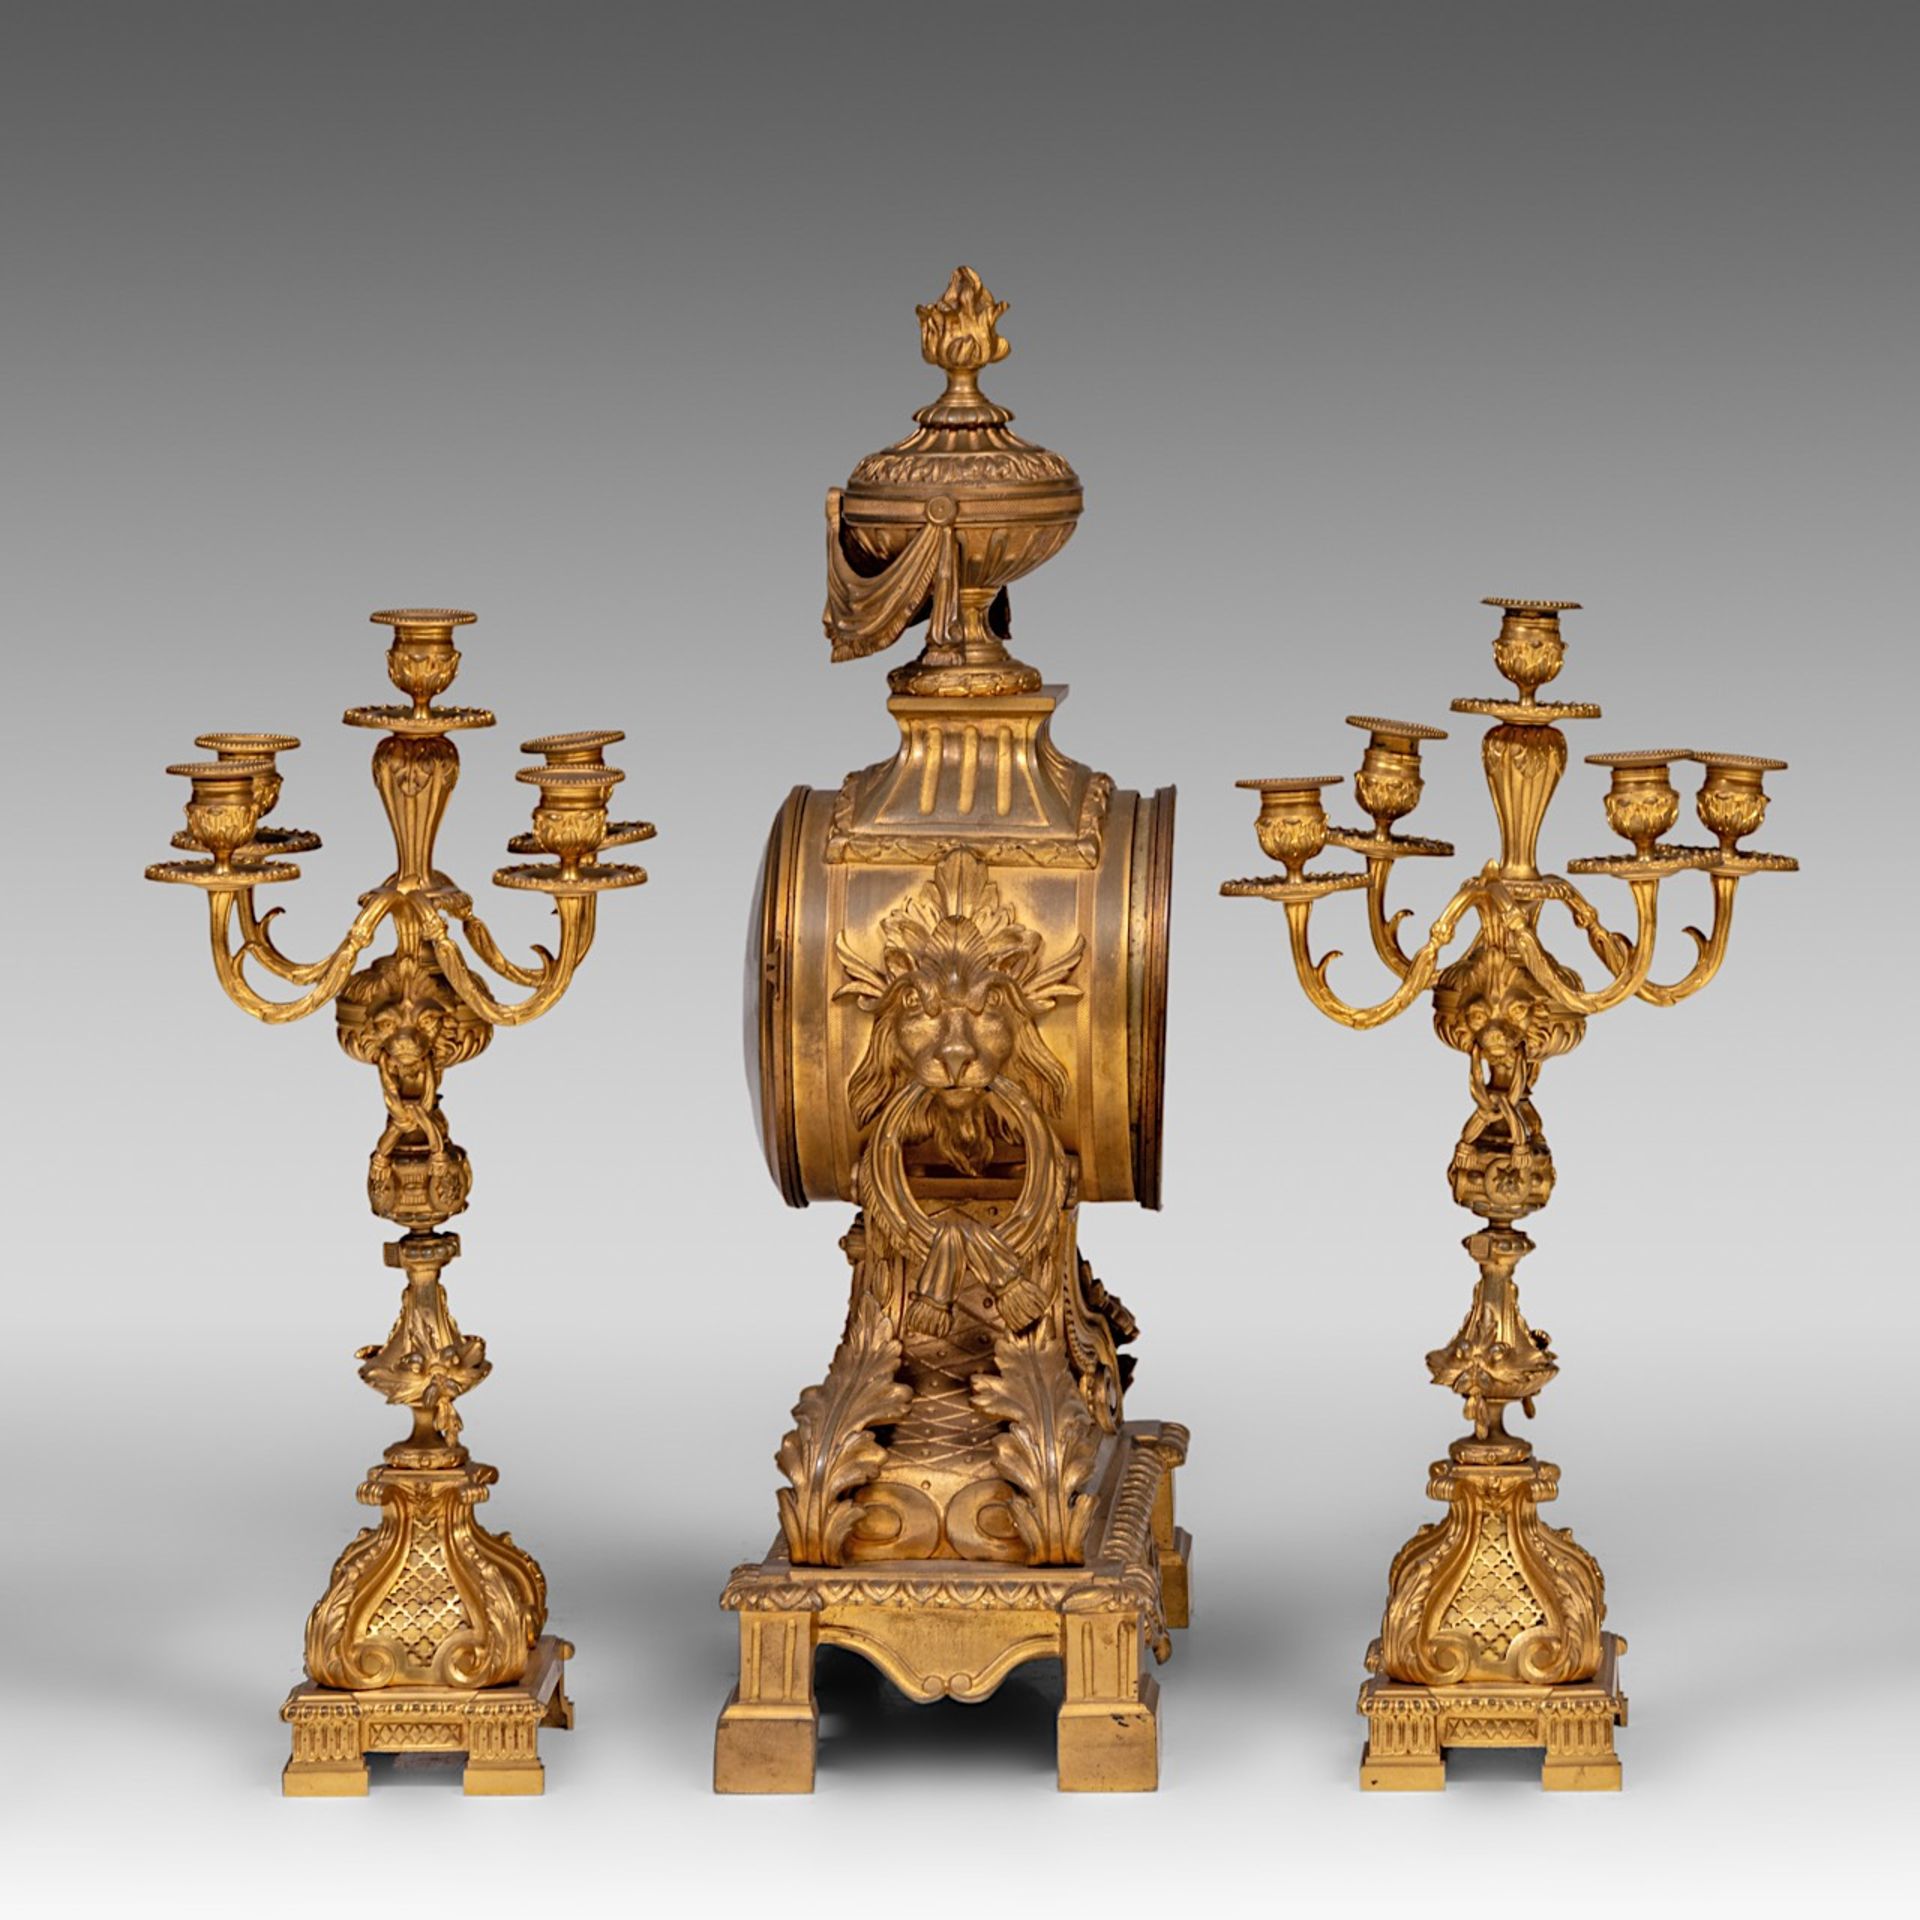 A three-piece Neoclassical gilt bronze mantle clock, H 50 - 65 cm - Image 2 of 6